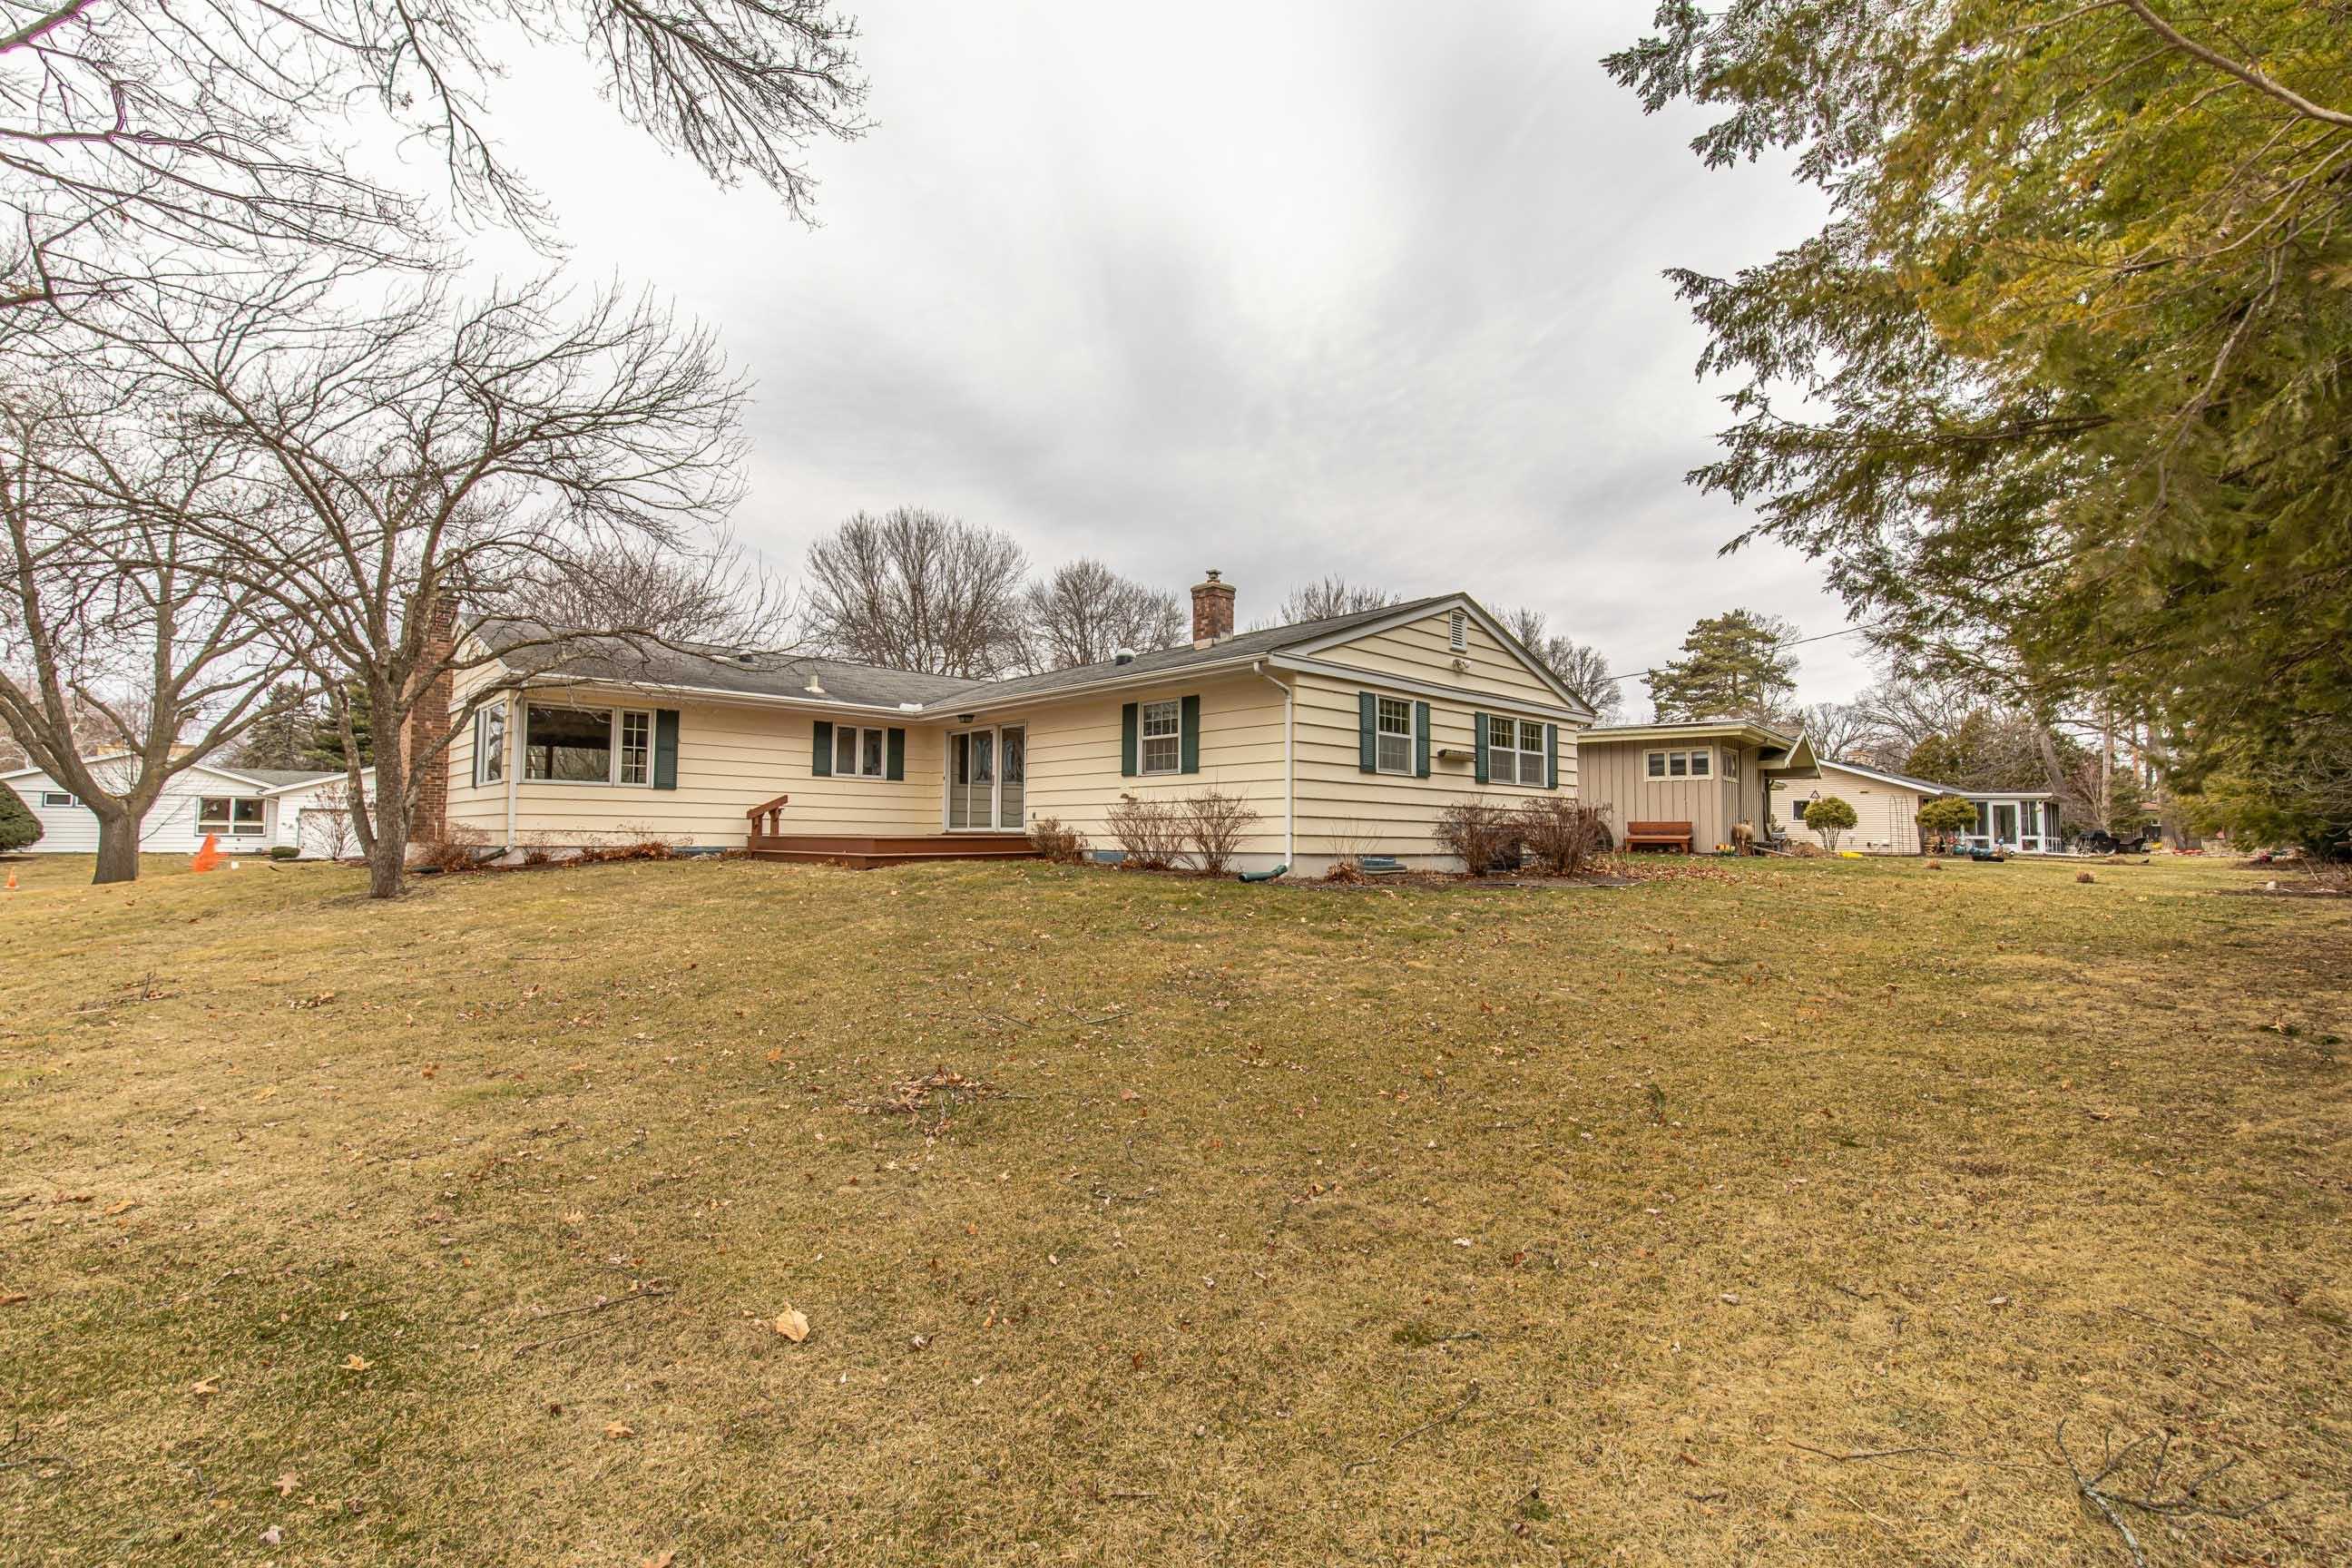 Photo -42 - 733 Dearholt Rd Madison, WI 53711